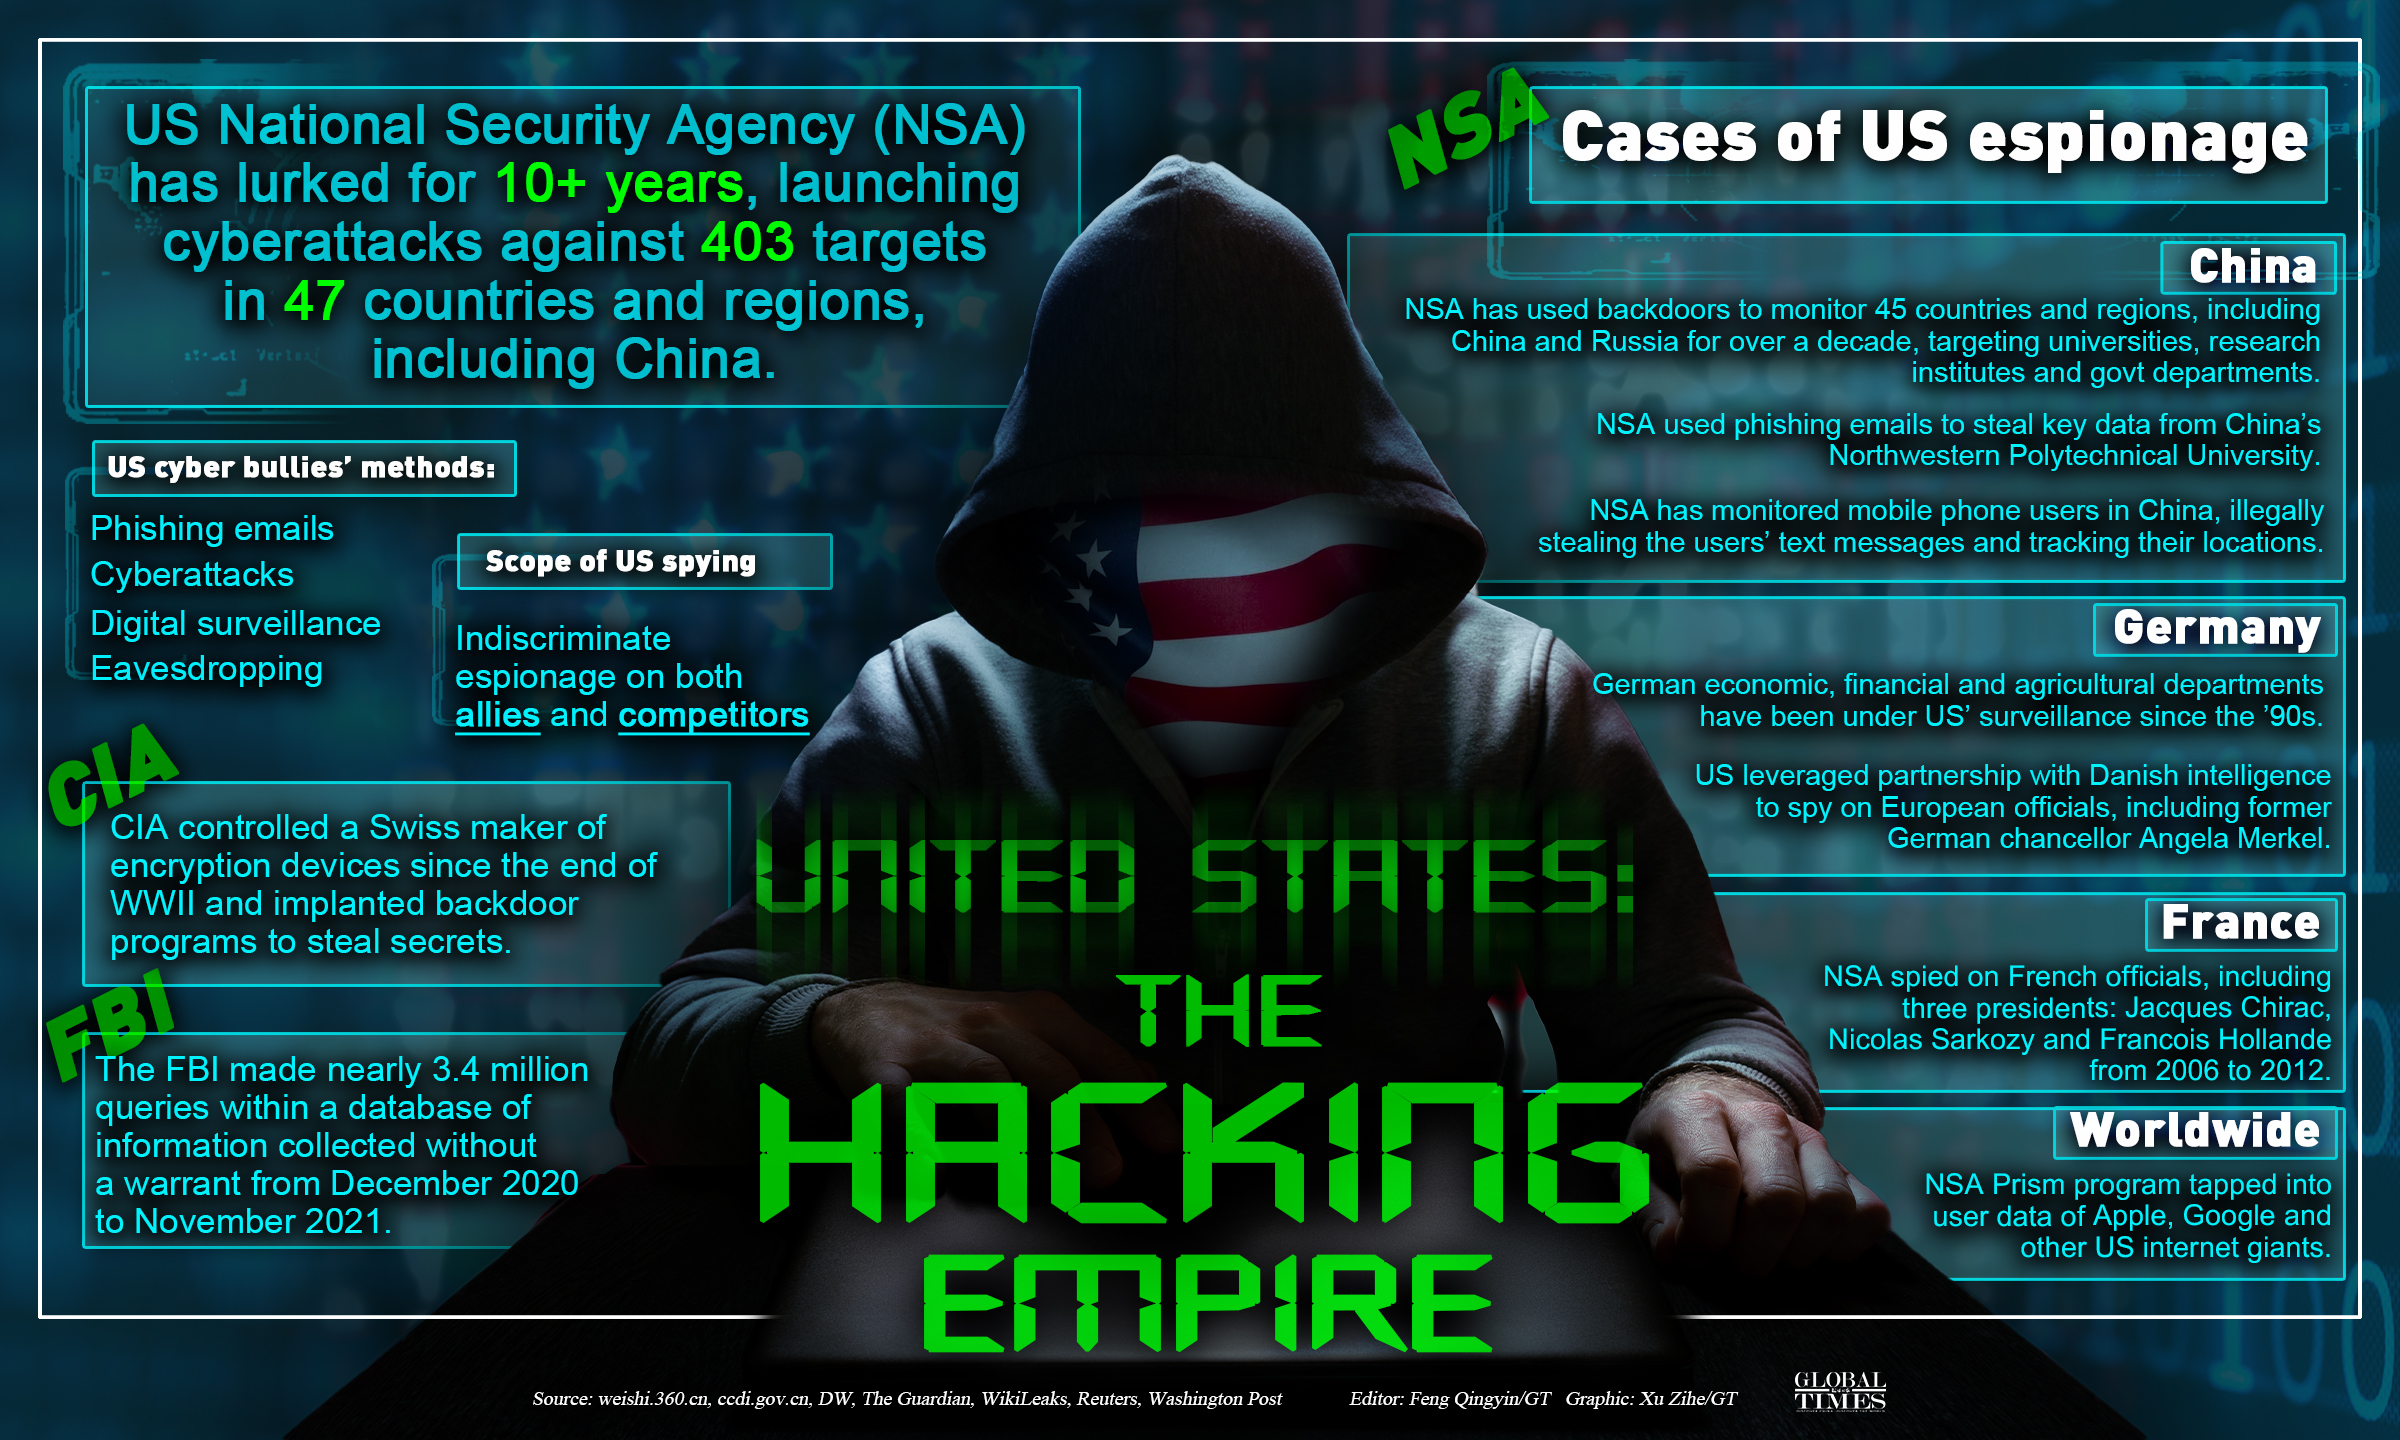 The US National Security Agency was found to have used phishing emails to steal key data from China’s leading aviation university. The US has launched indiscriminate cyberattacks on both allies and competitors, making it the true empire of hacking. Editor: Feng Qingyin/GT Graphic: Xu Zihe/GT